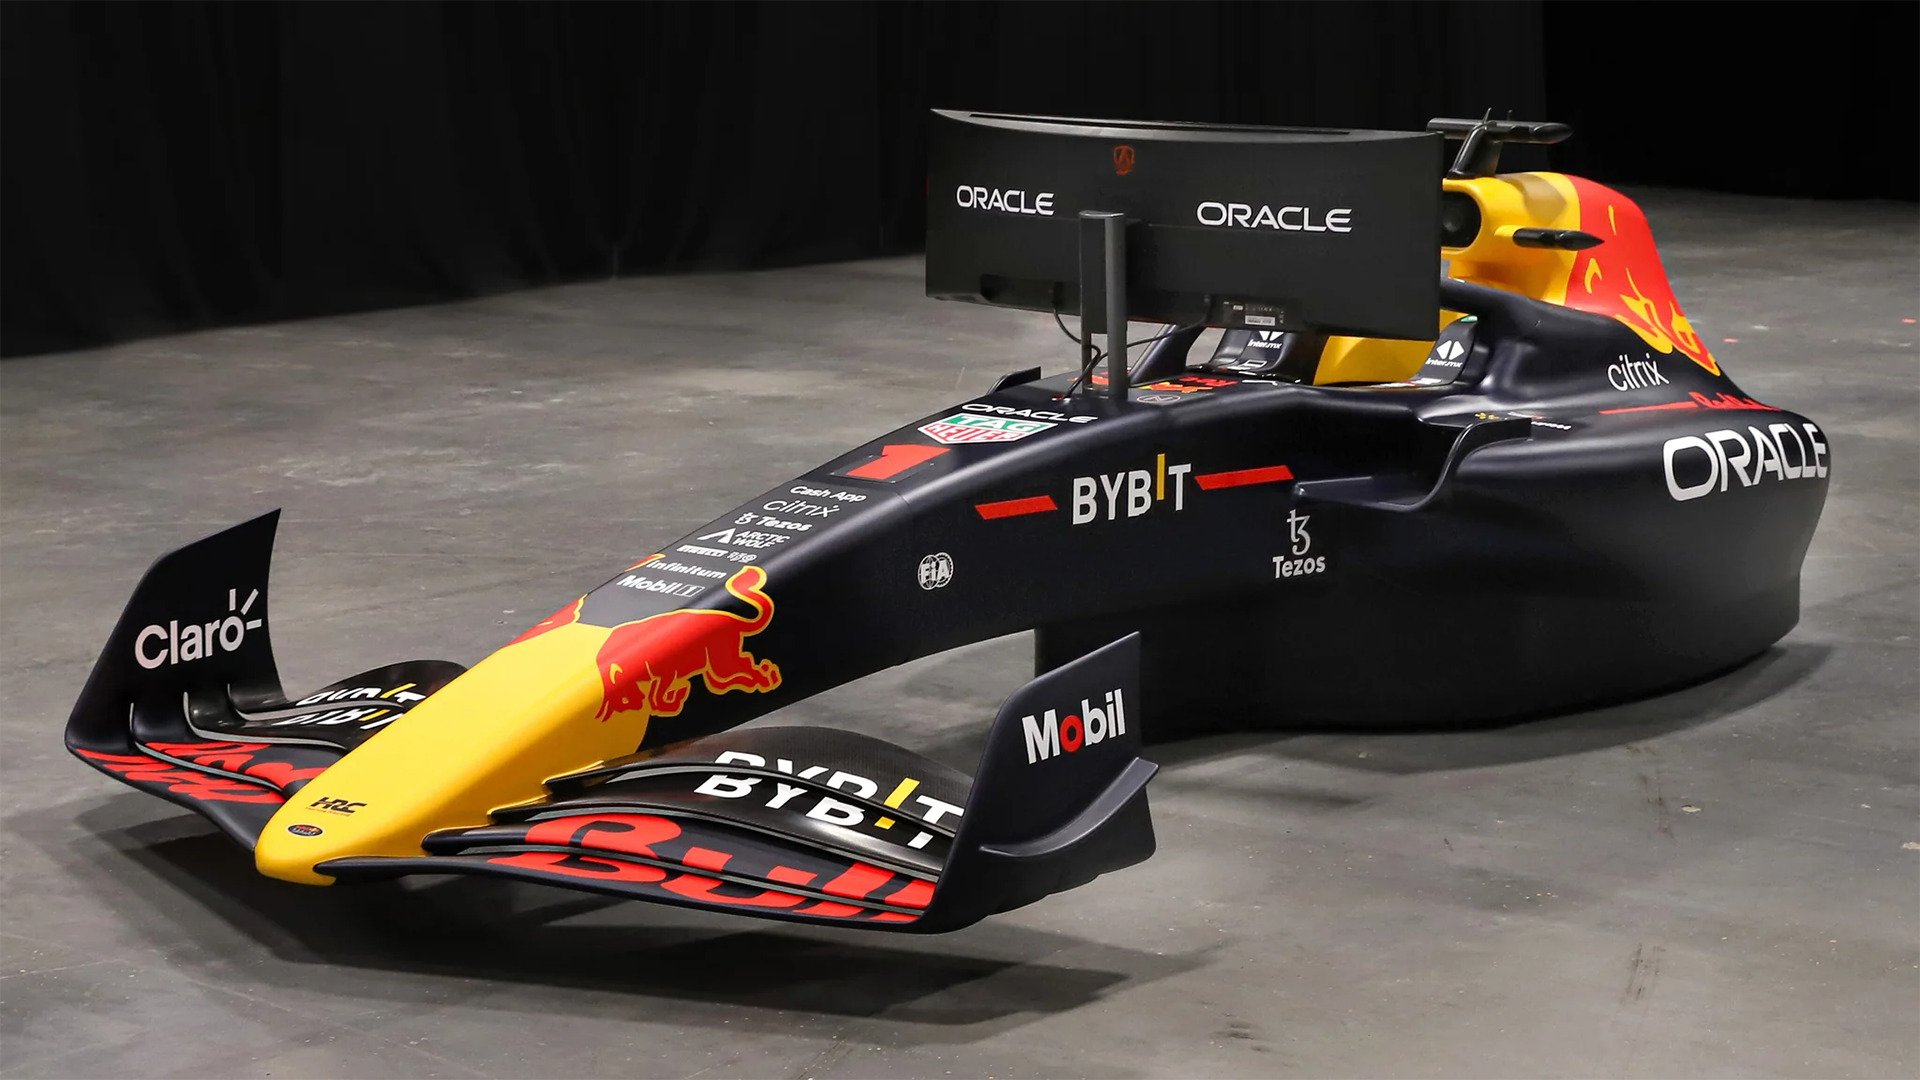 Red Bull launches 2022 F1 livery on RB18 show car